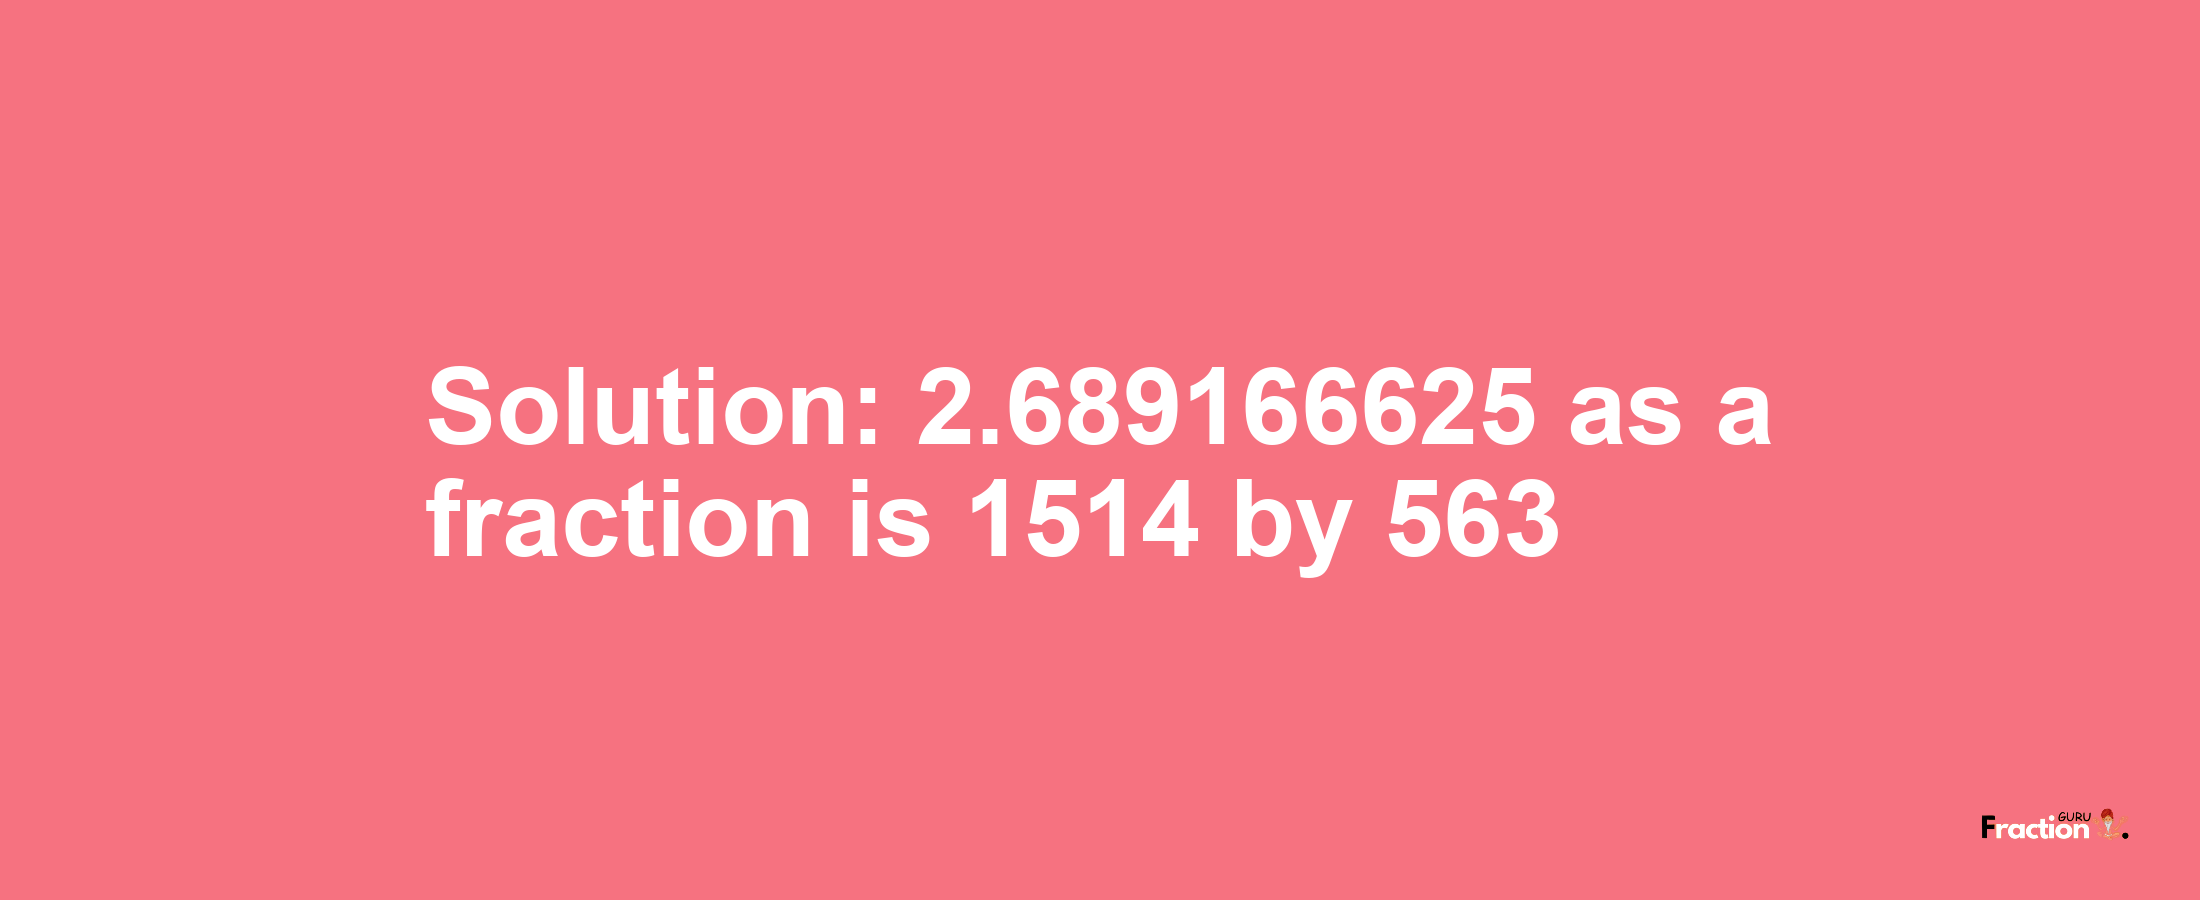 Solution:2.689166625 as a fraction is 1514/563